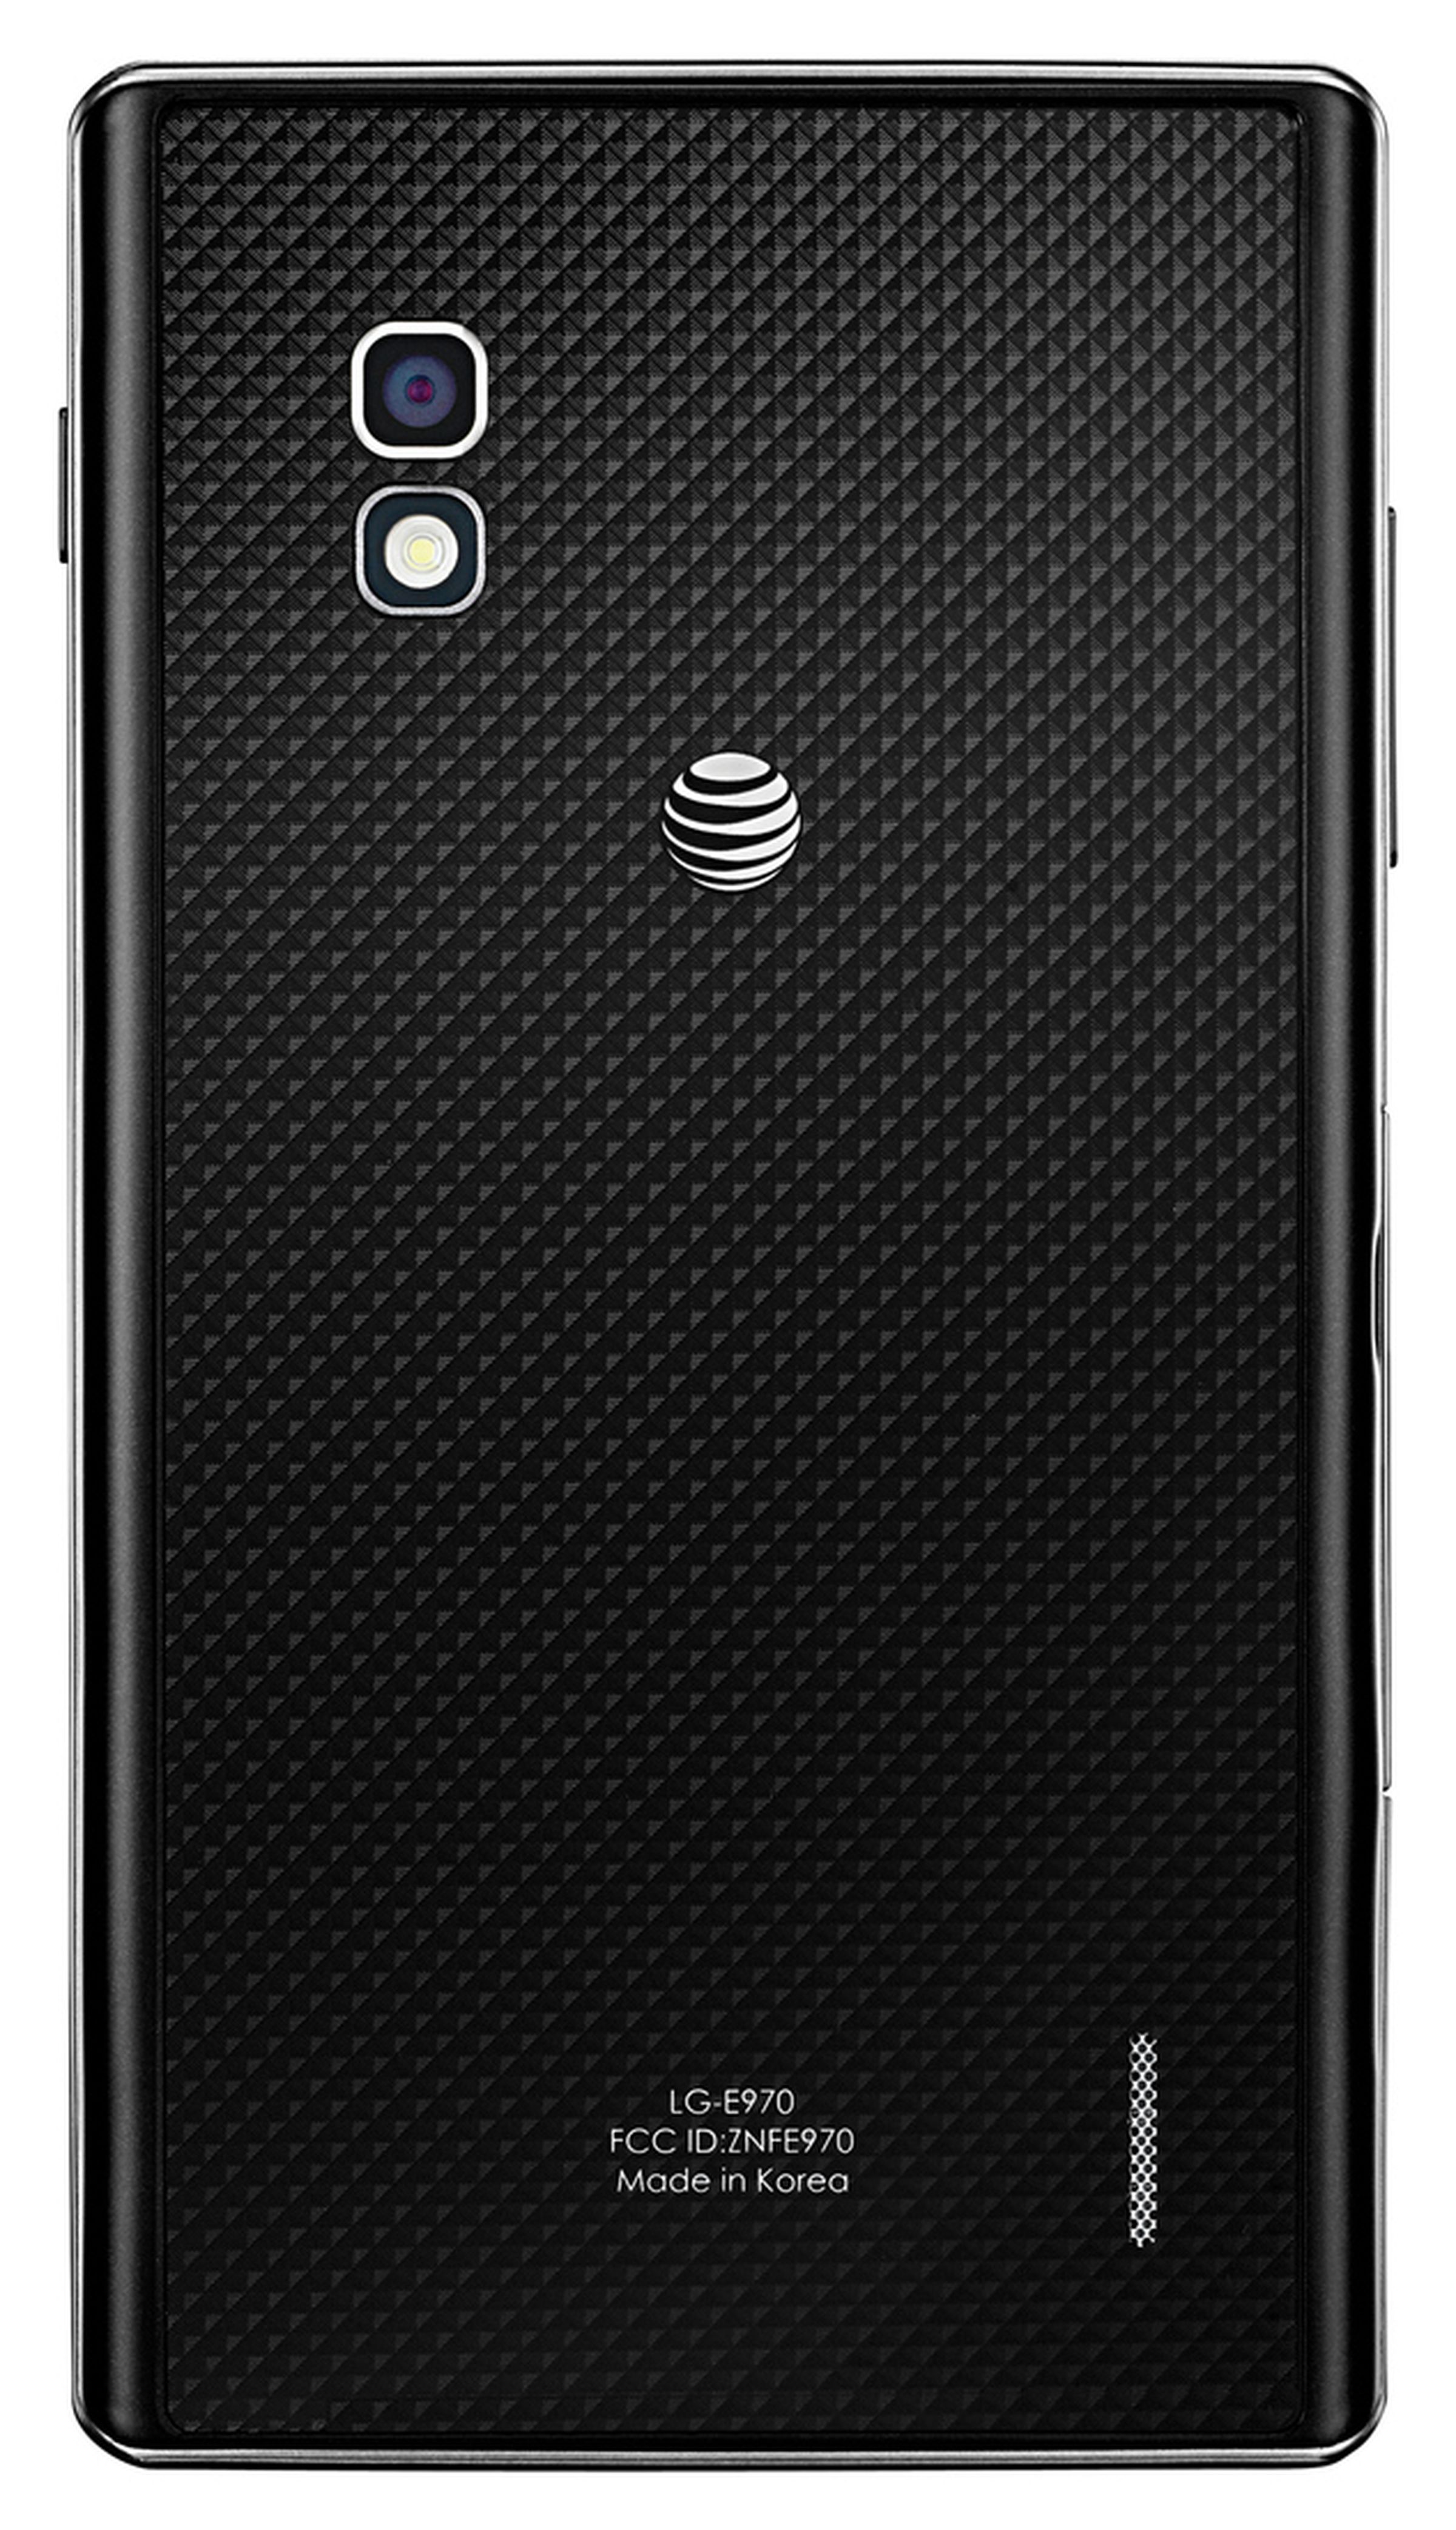 LG Optimus G for AT&T